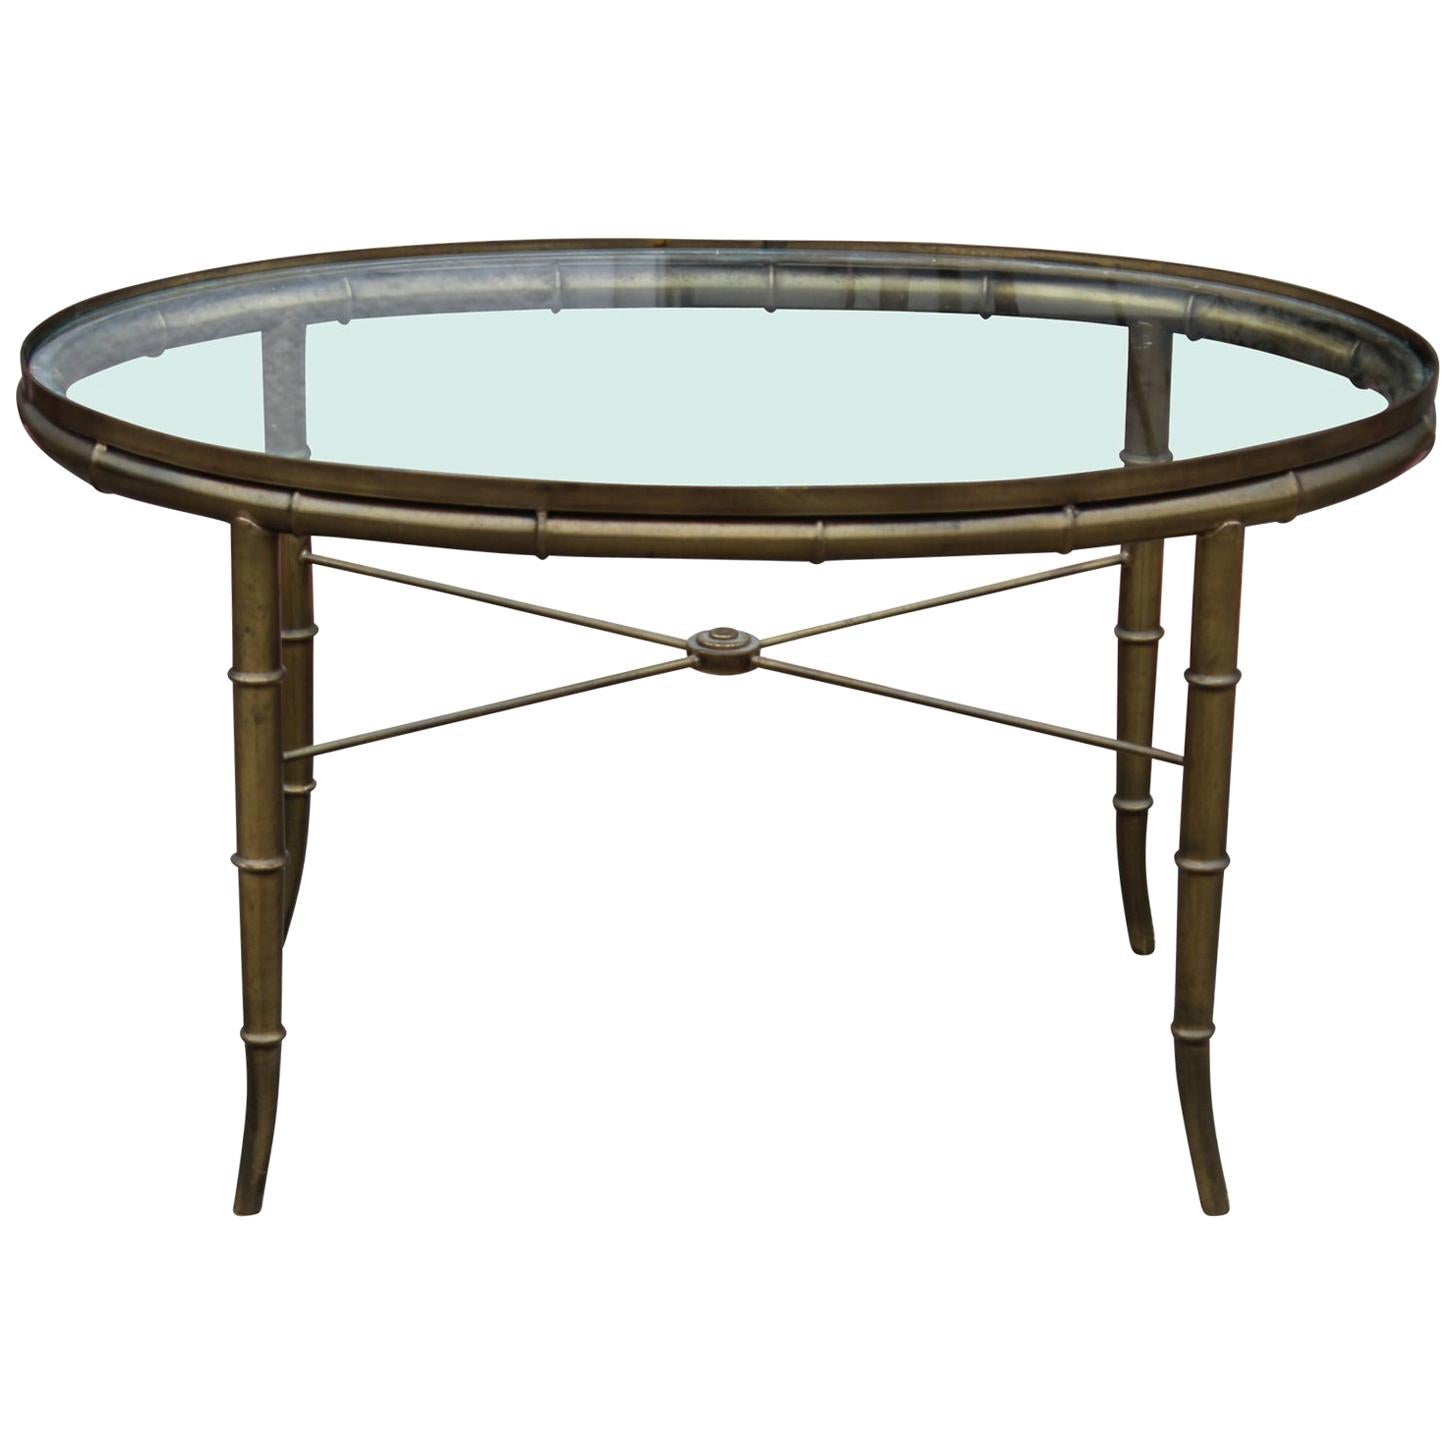 Hollywood Regency Italian Brass and Glass Oval Faux Bamboo Coffee Table